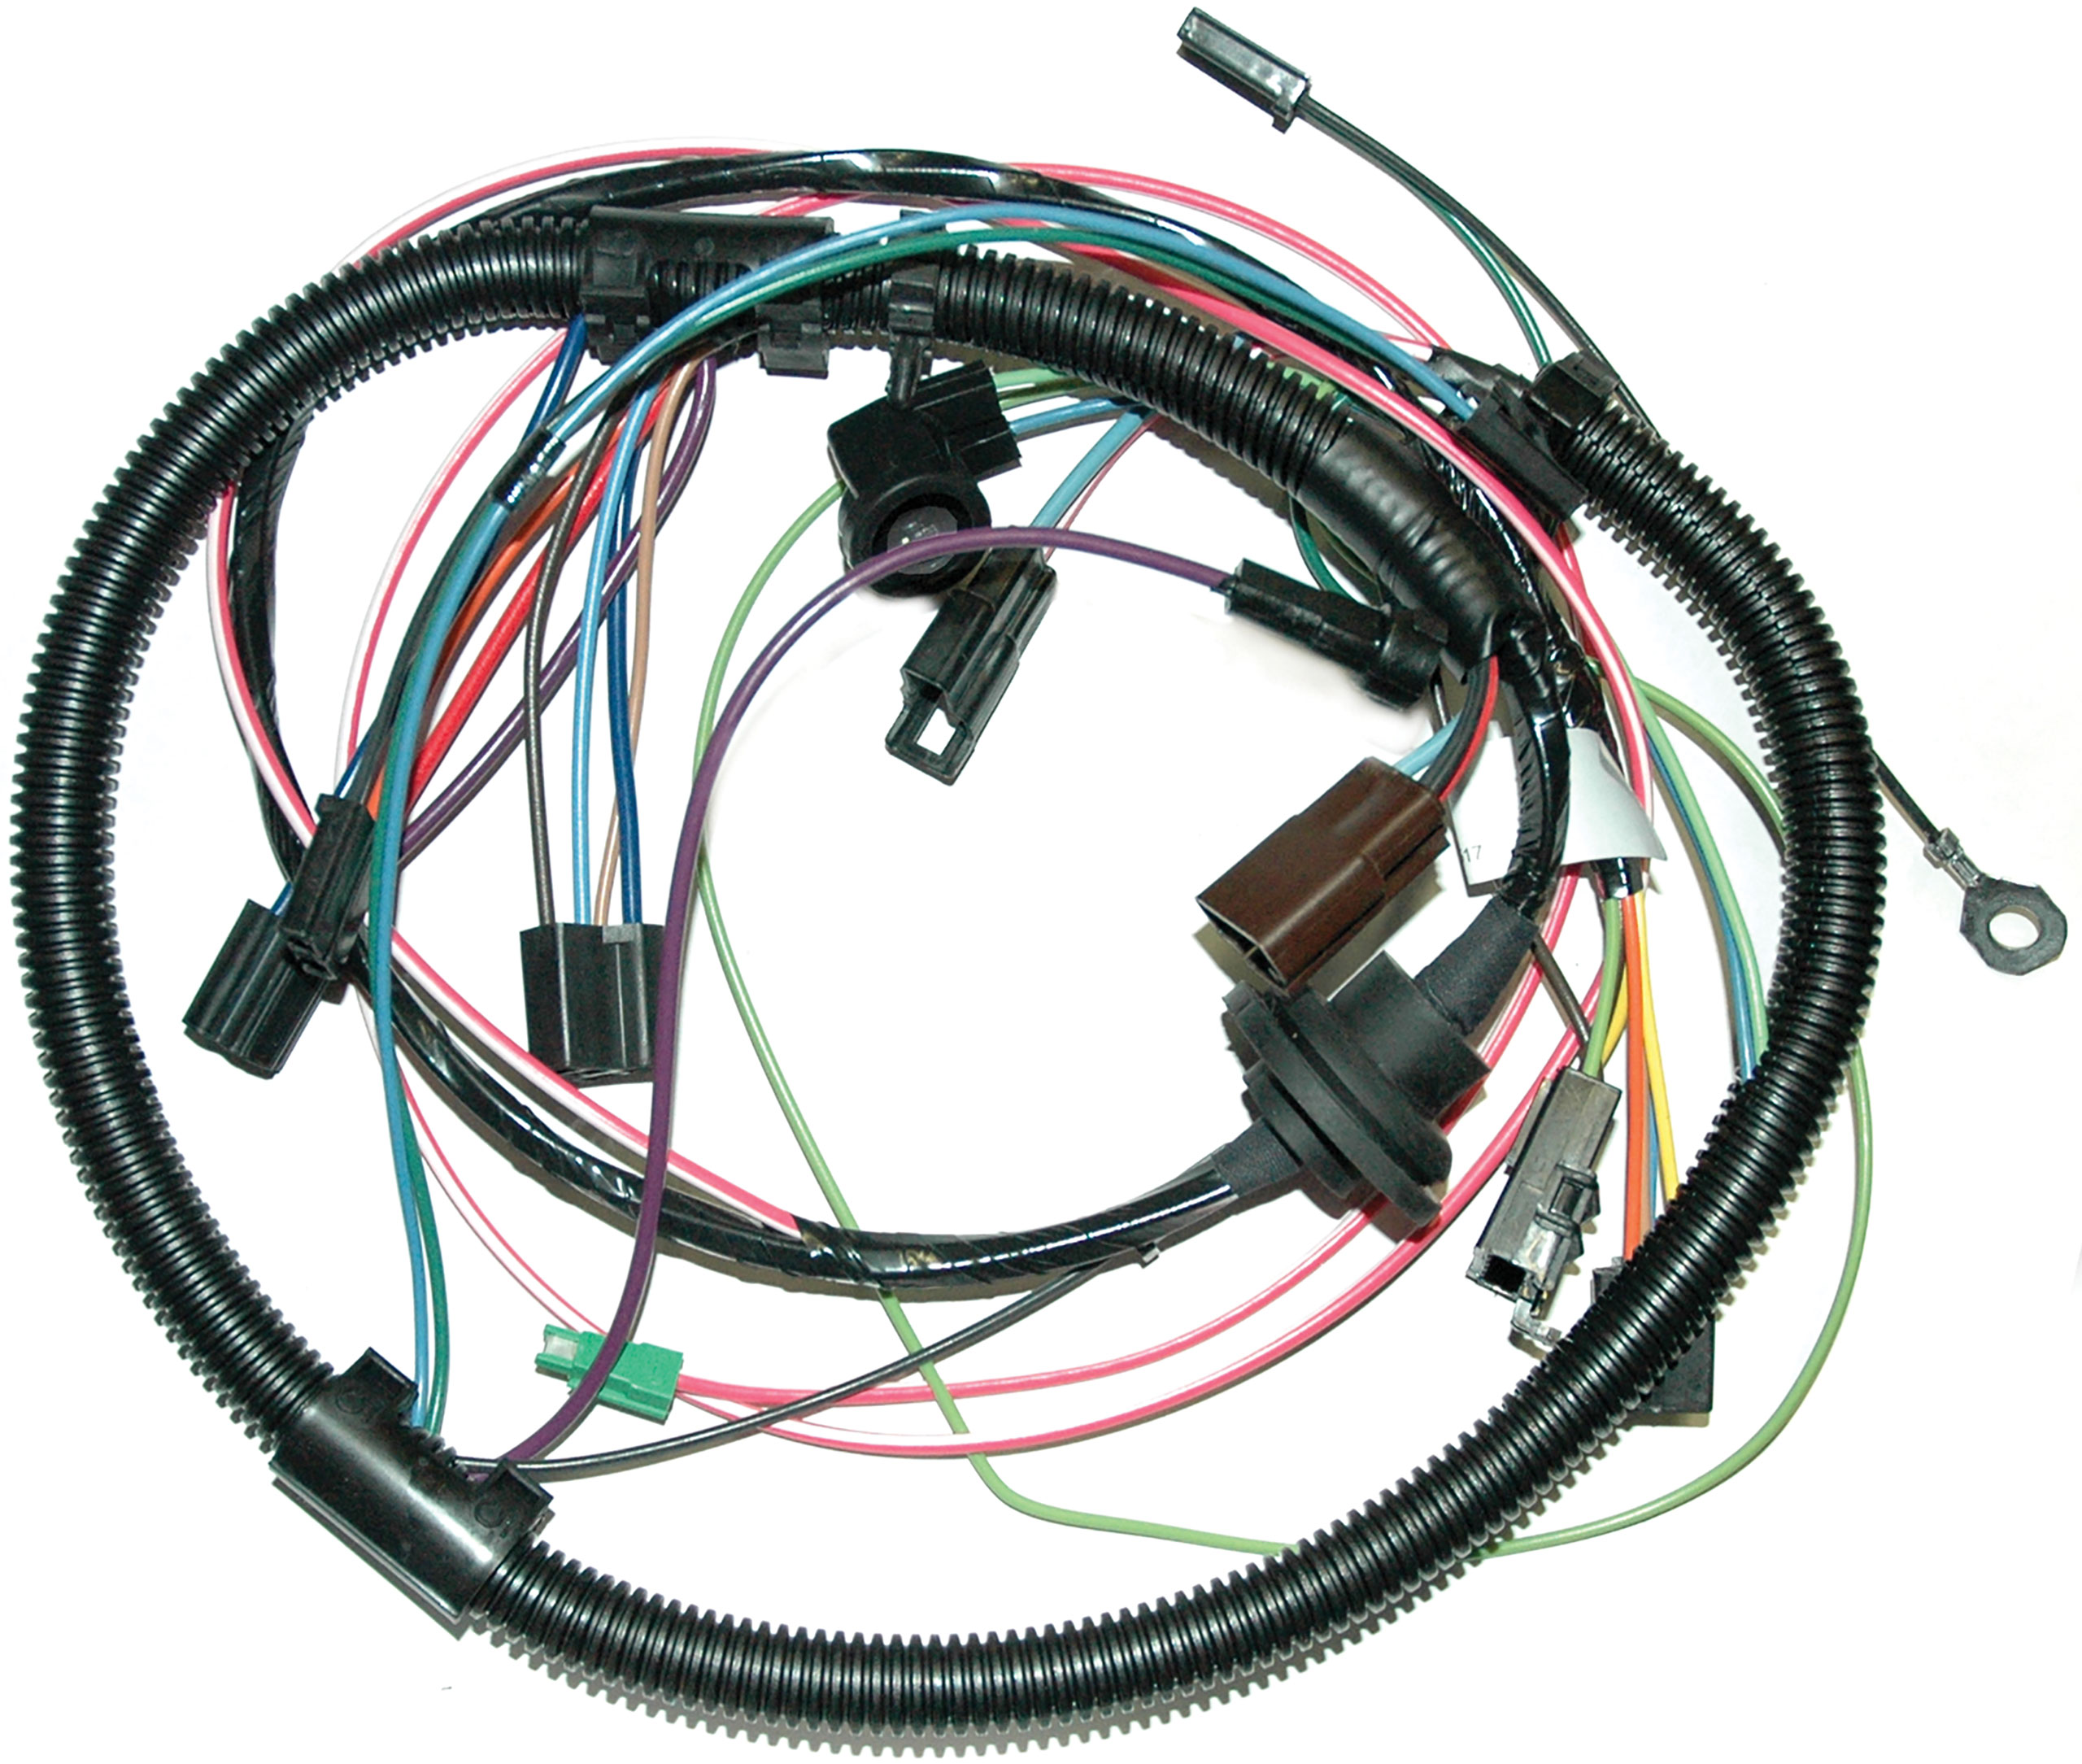 C3 1979 Chevrolet Corvette Harness. Air Conditioning W/Heater Wiring - W/Auxiliary Fan - L82 - Lectric Limited, Inc.